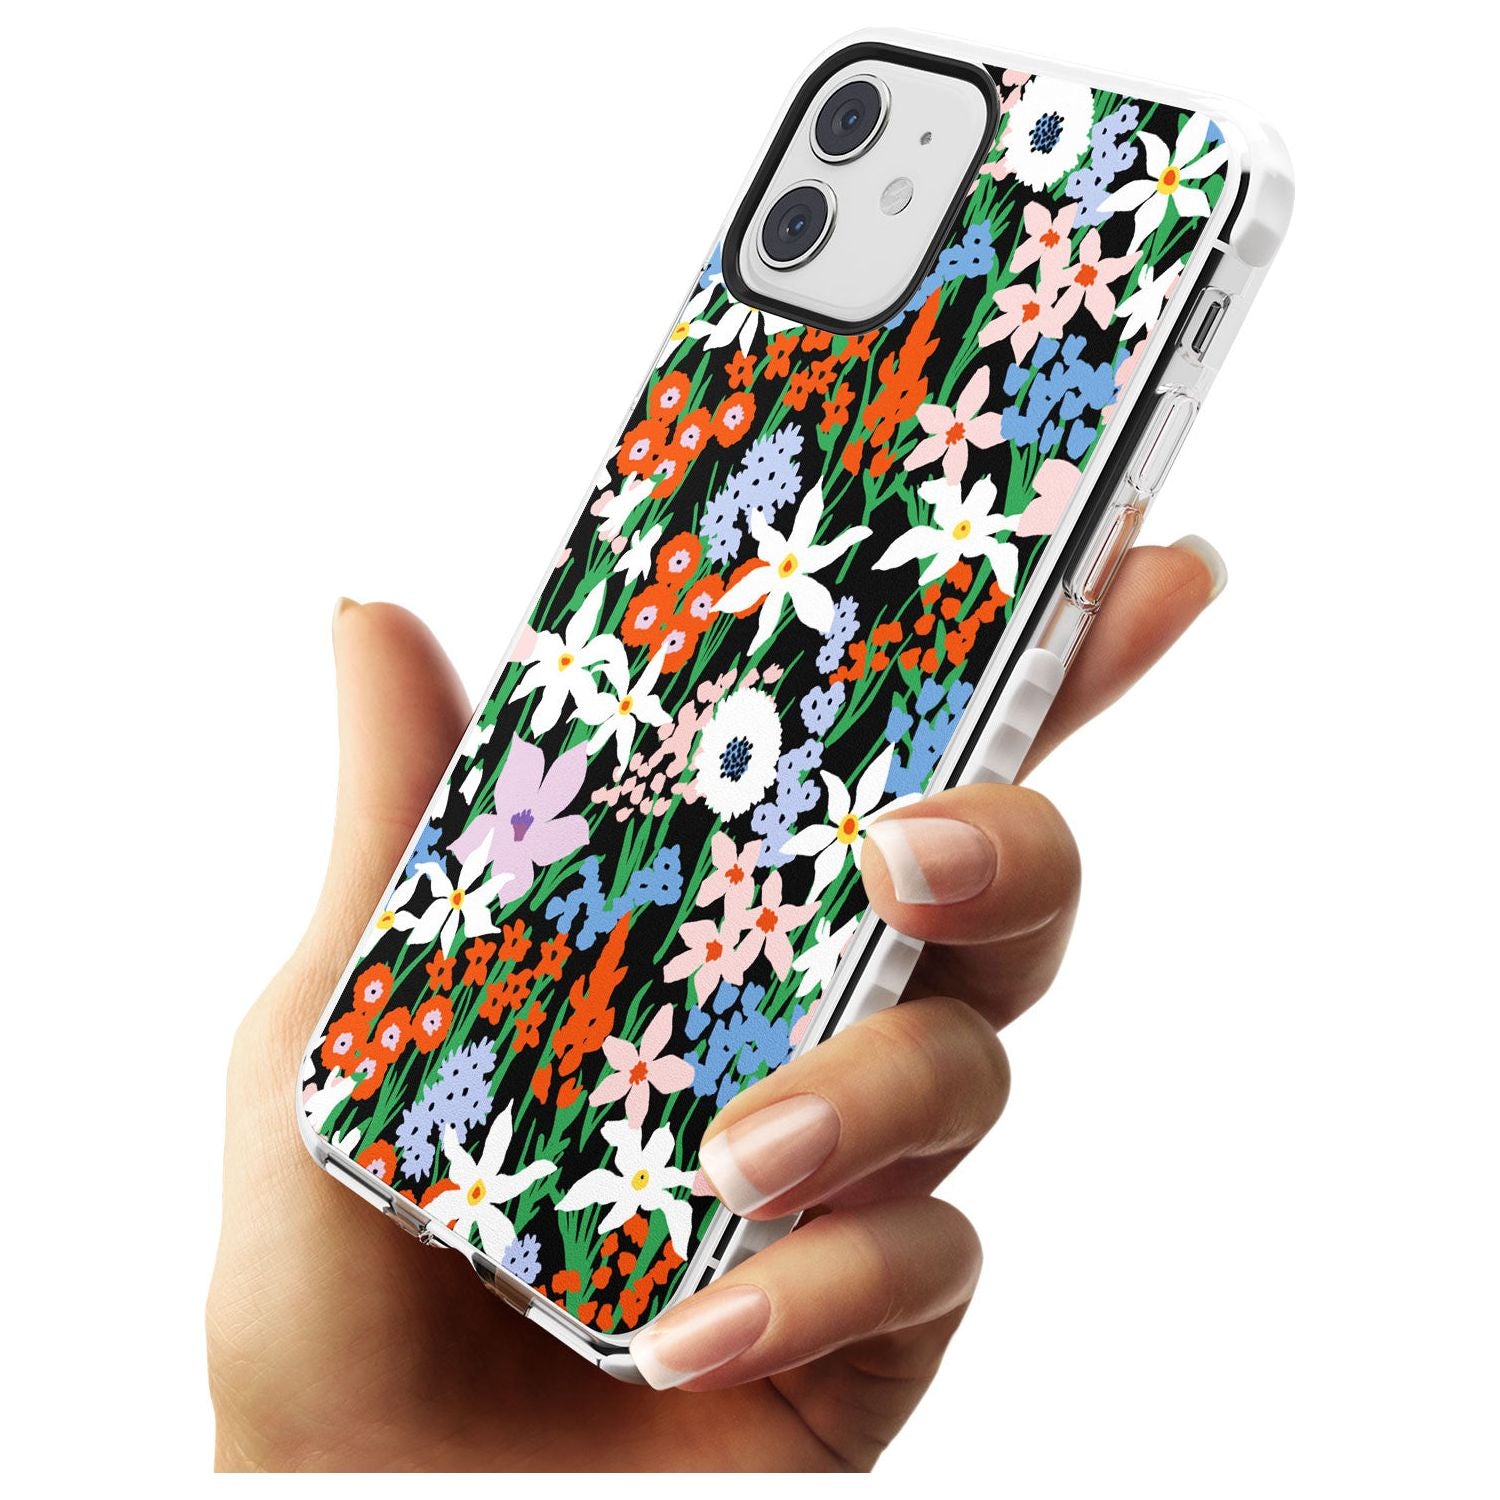 Springtime Meadow: Solid Slim TPU Phone Case for iPhone 11